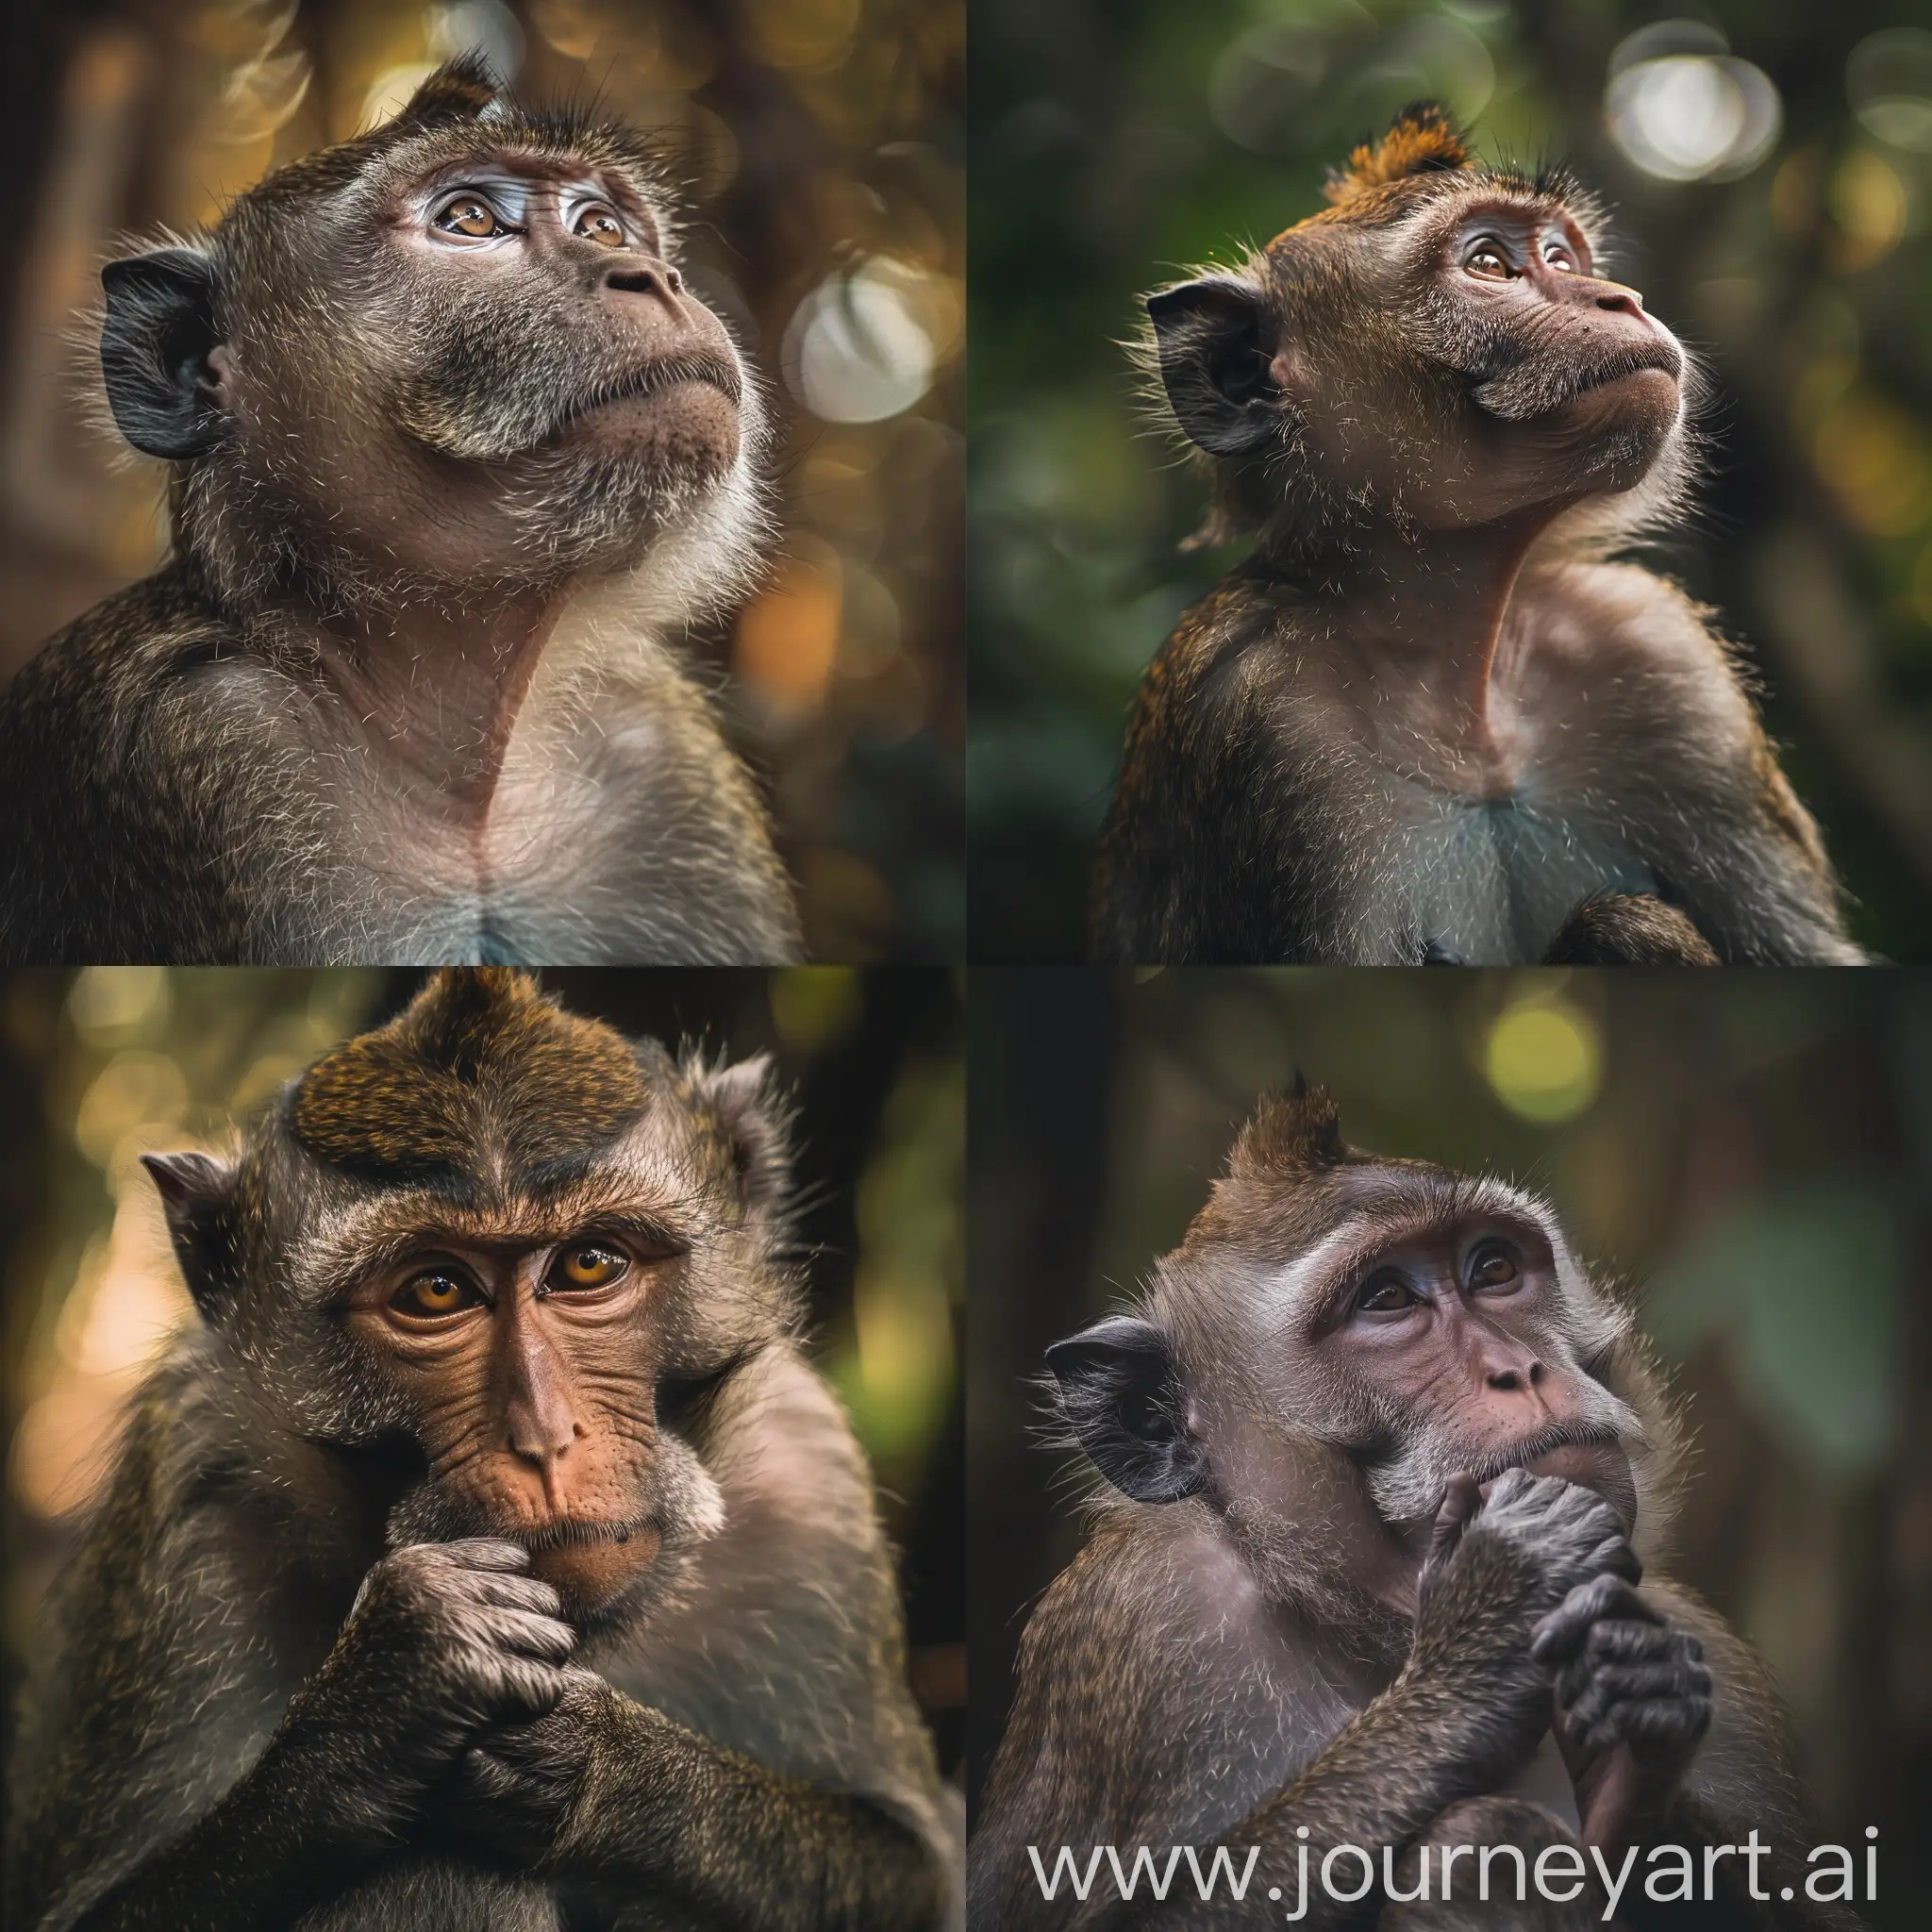 Monkey-King-Observing-Humans-in-Realistic-8K-Photo